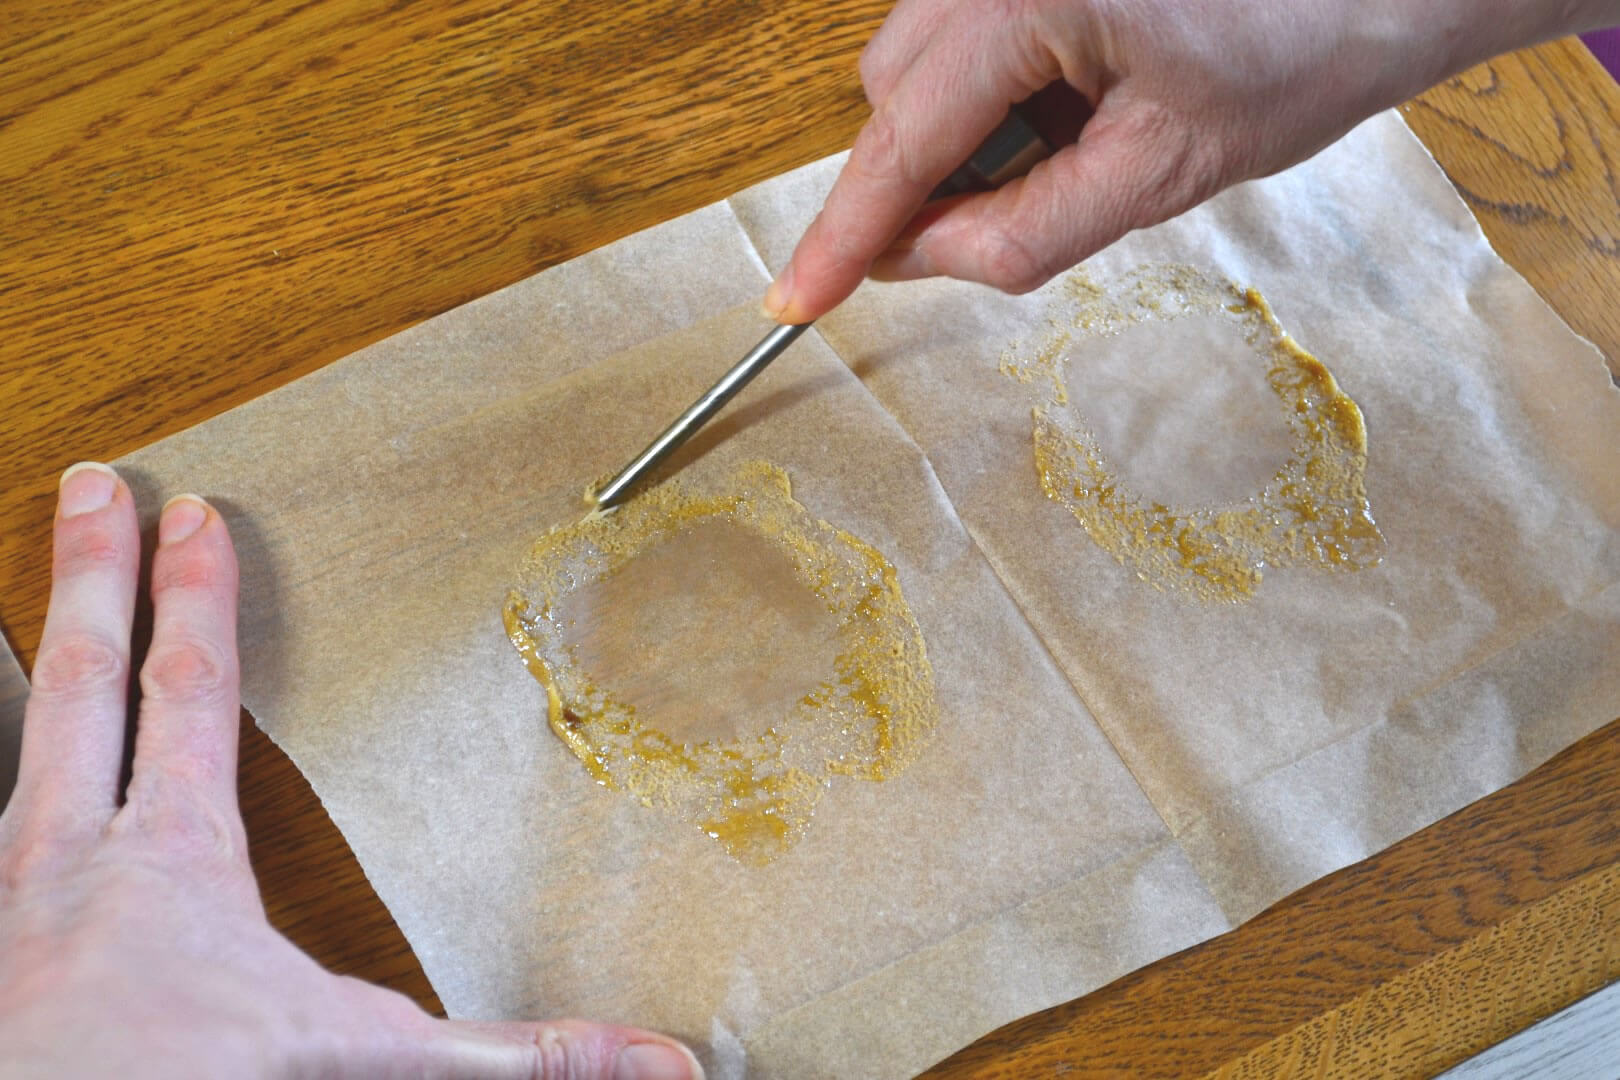 Rosin Paper for rosin and BHO extractions